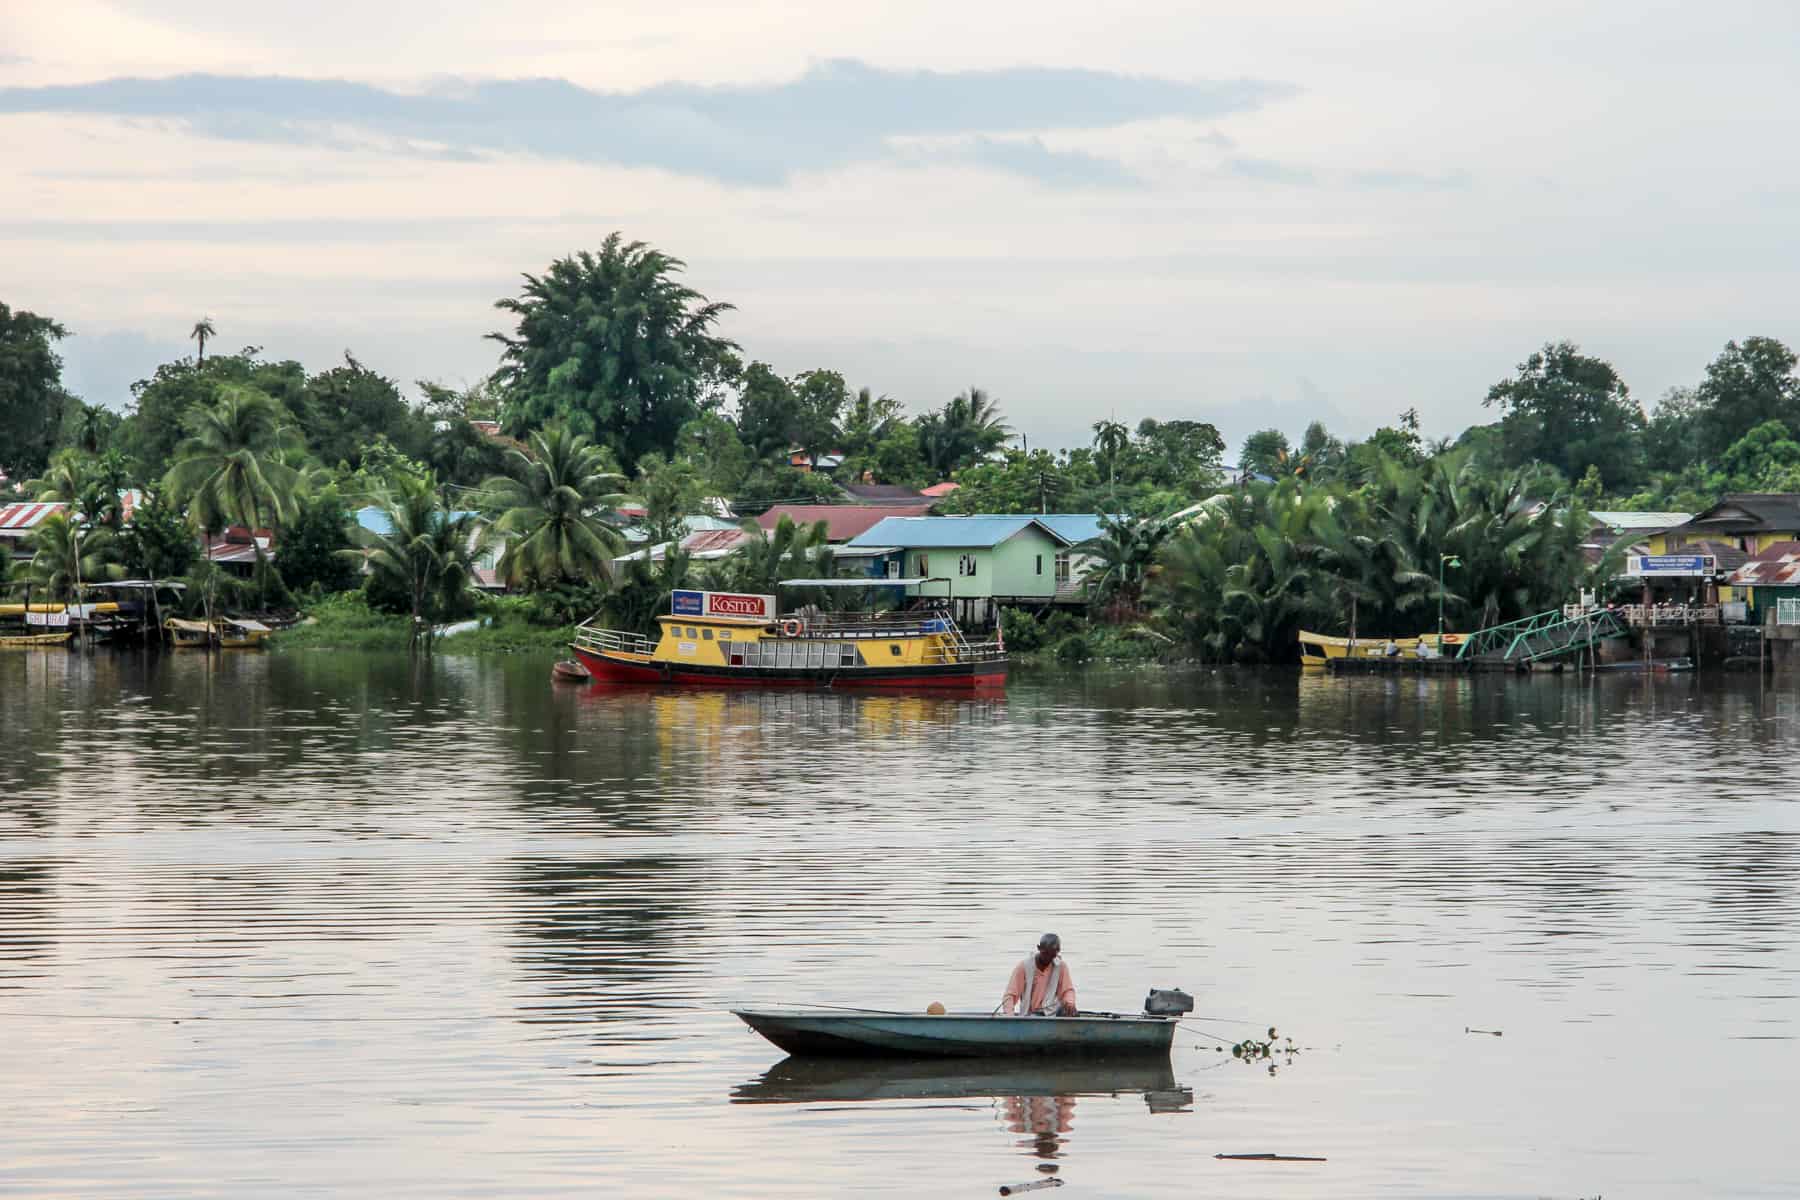 A man rows a small wooden boat on the Sarawak River in Kuching. In the background is the local neighbourhood marked by rows of colourful painted houses in bright colours, set within jungle green